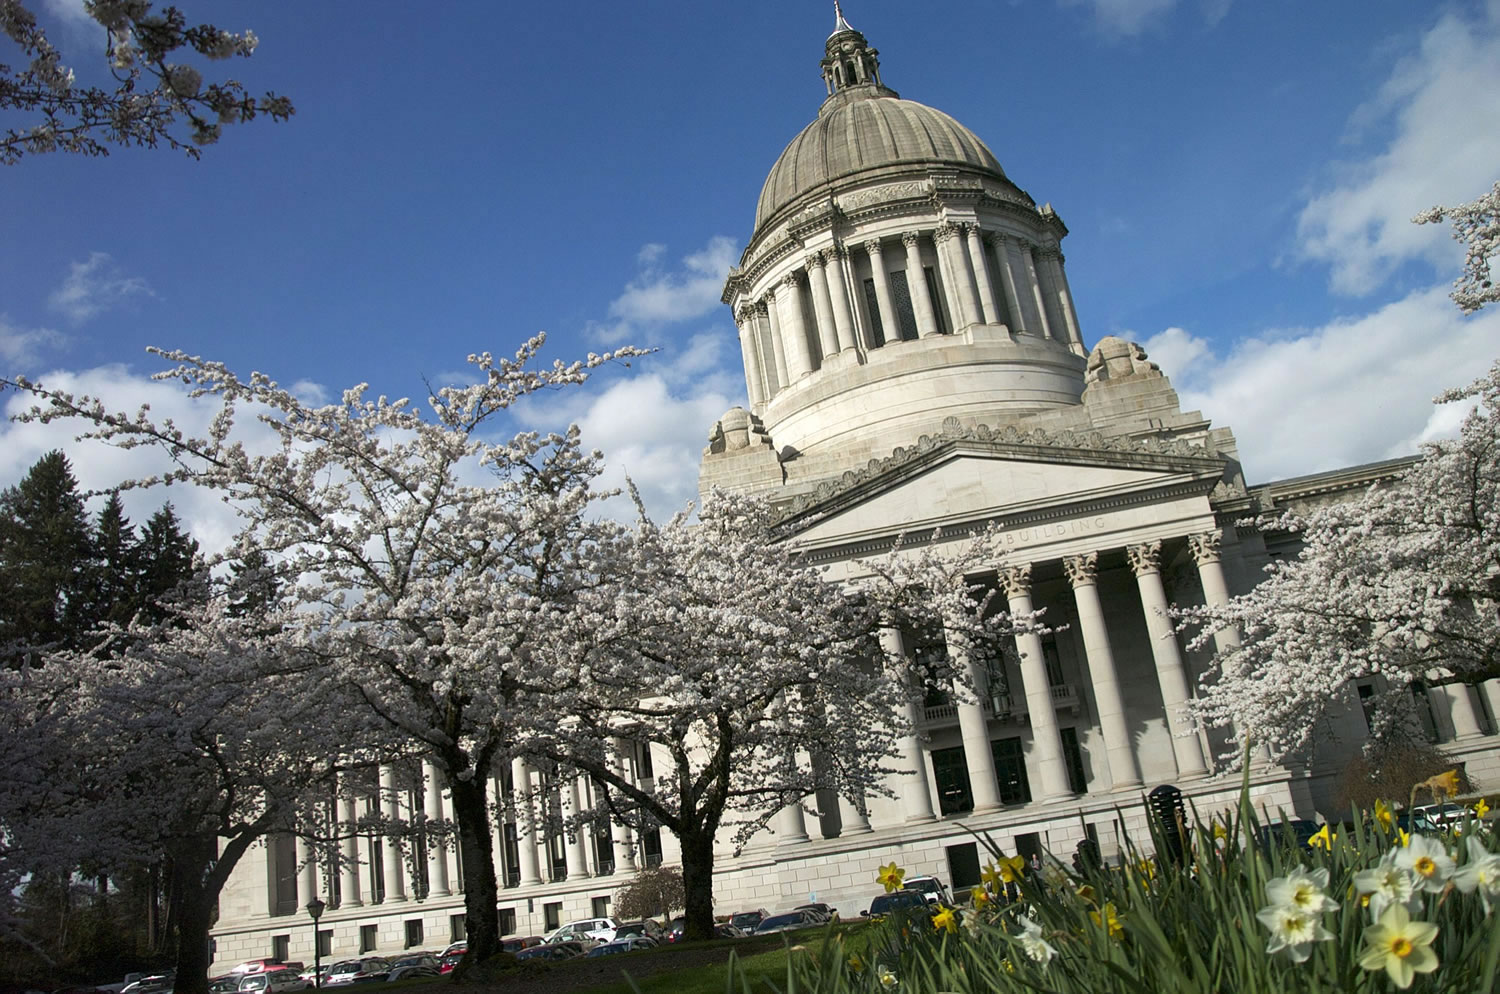 Lauren Dake/The Columbian
Under the state constitution, lawmakers have until April 26 to meet one of their most pressing tasks: adequately funding the state's public schools.